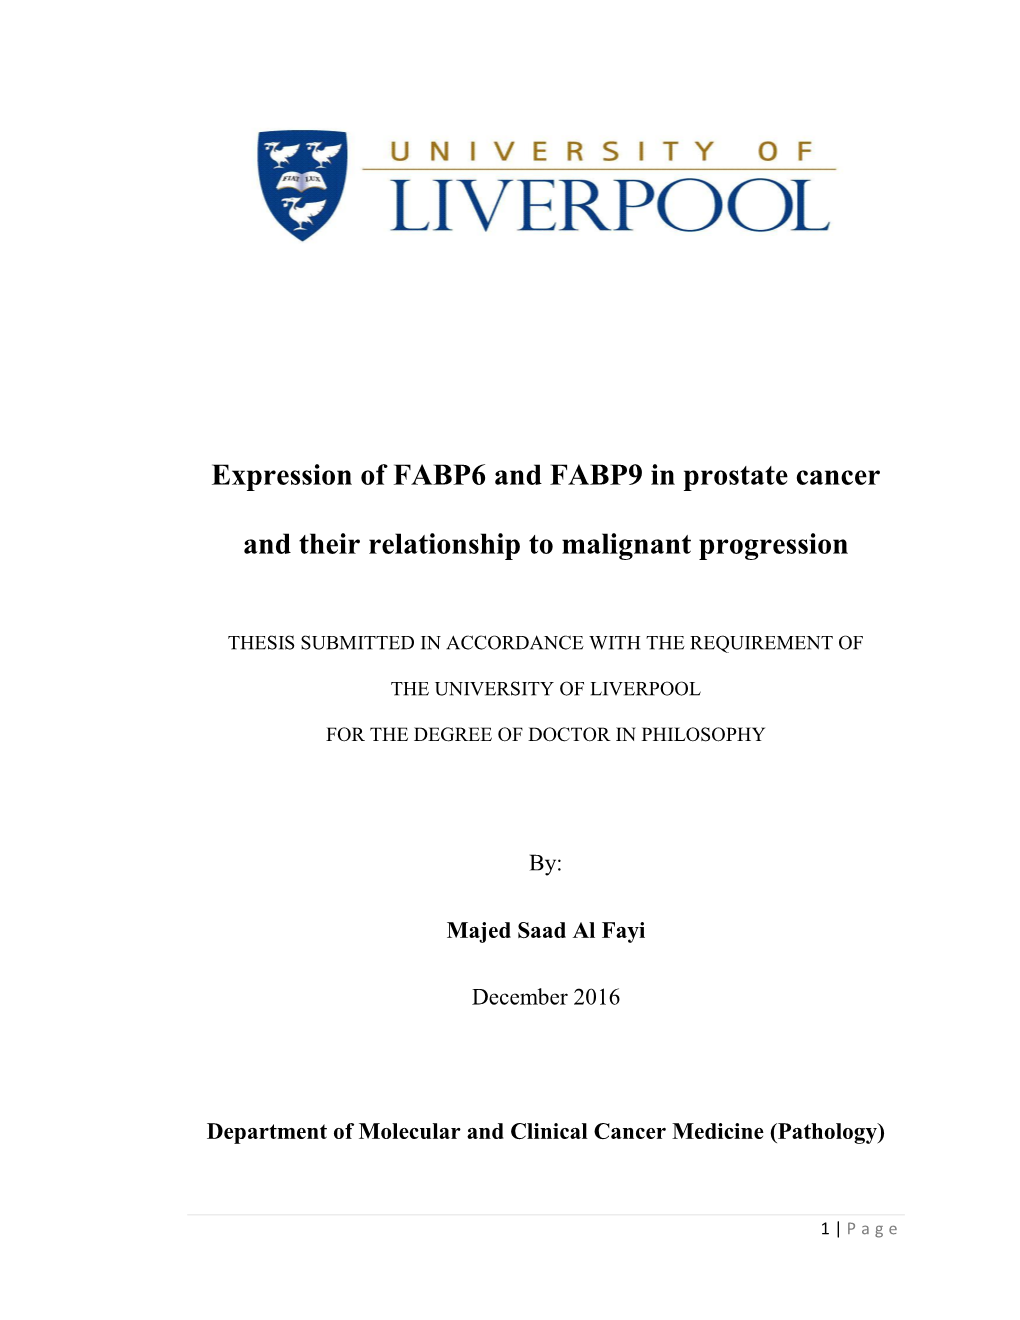 Expression of FABP6 and FABP9 in Prostate Cancer and Their